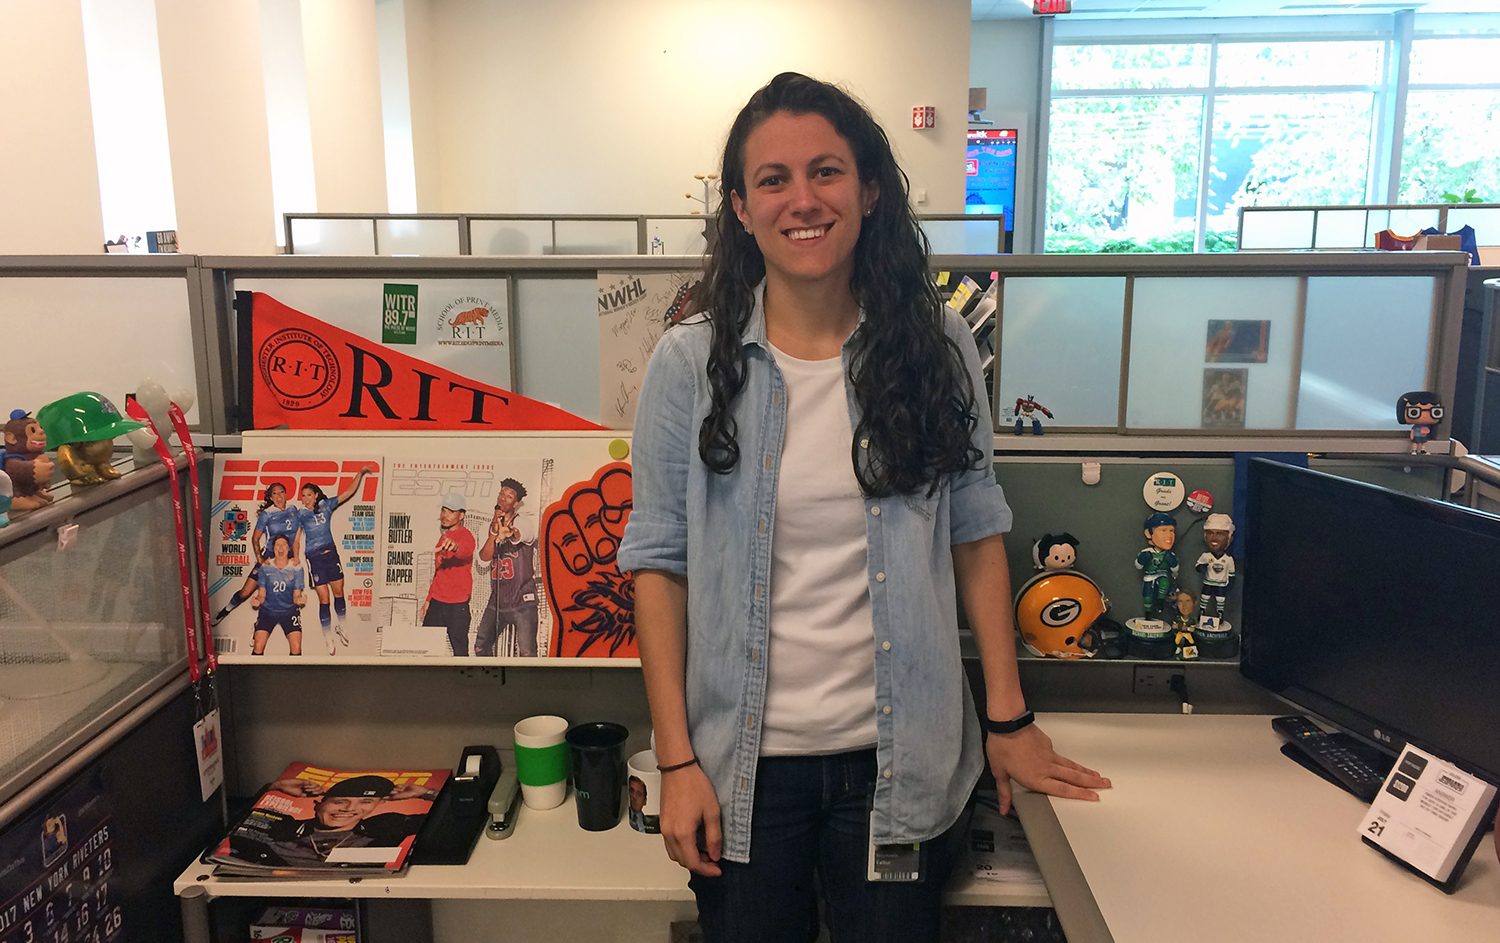 Fallon standing in her cubicle which features RIT branded items